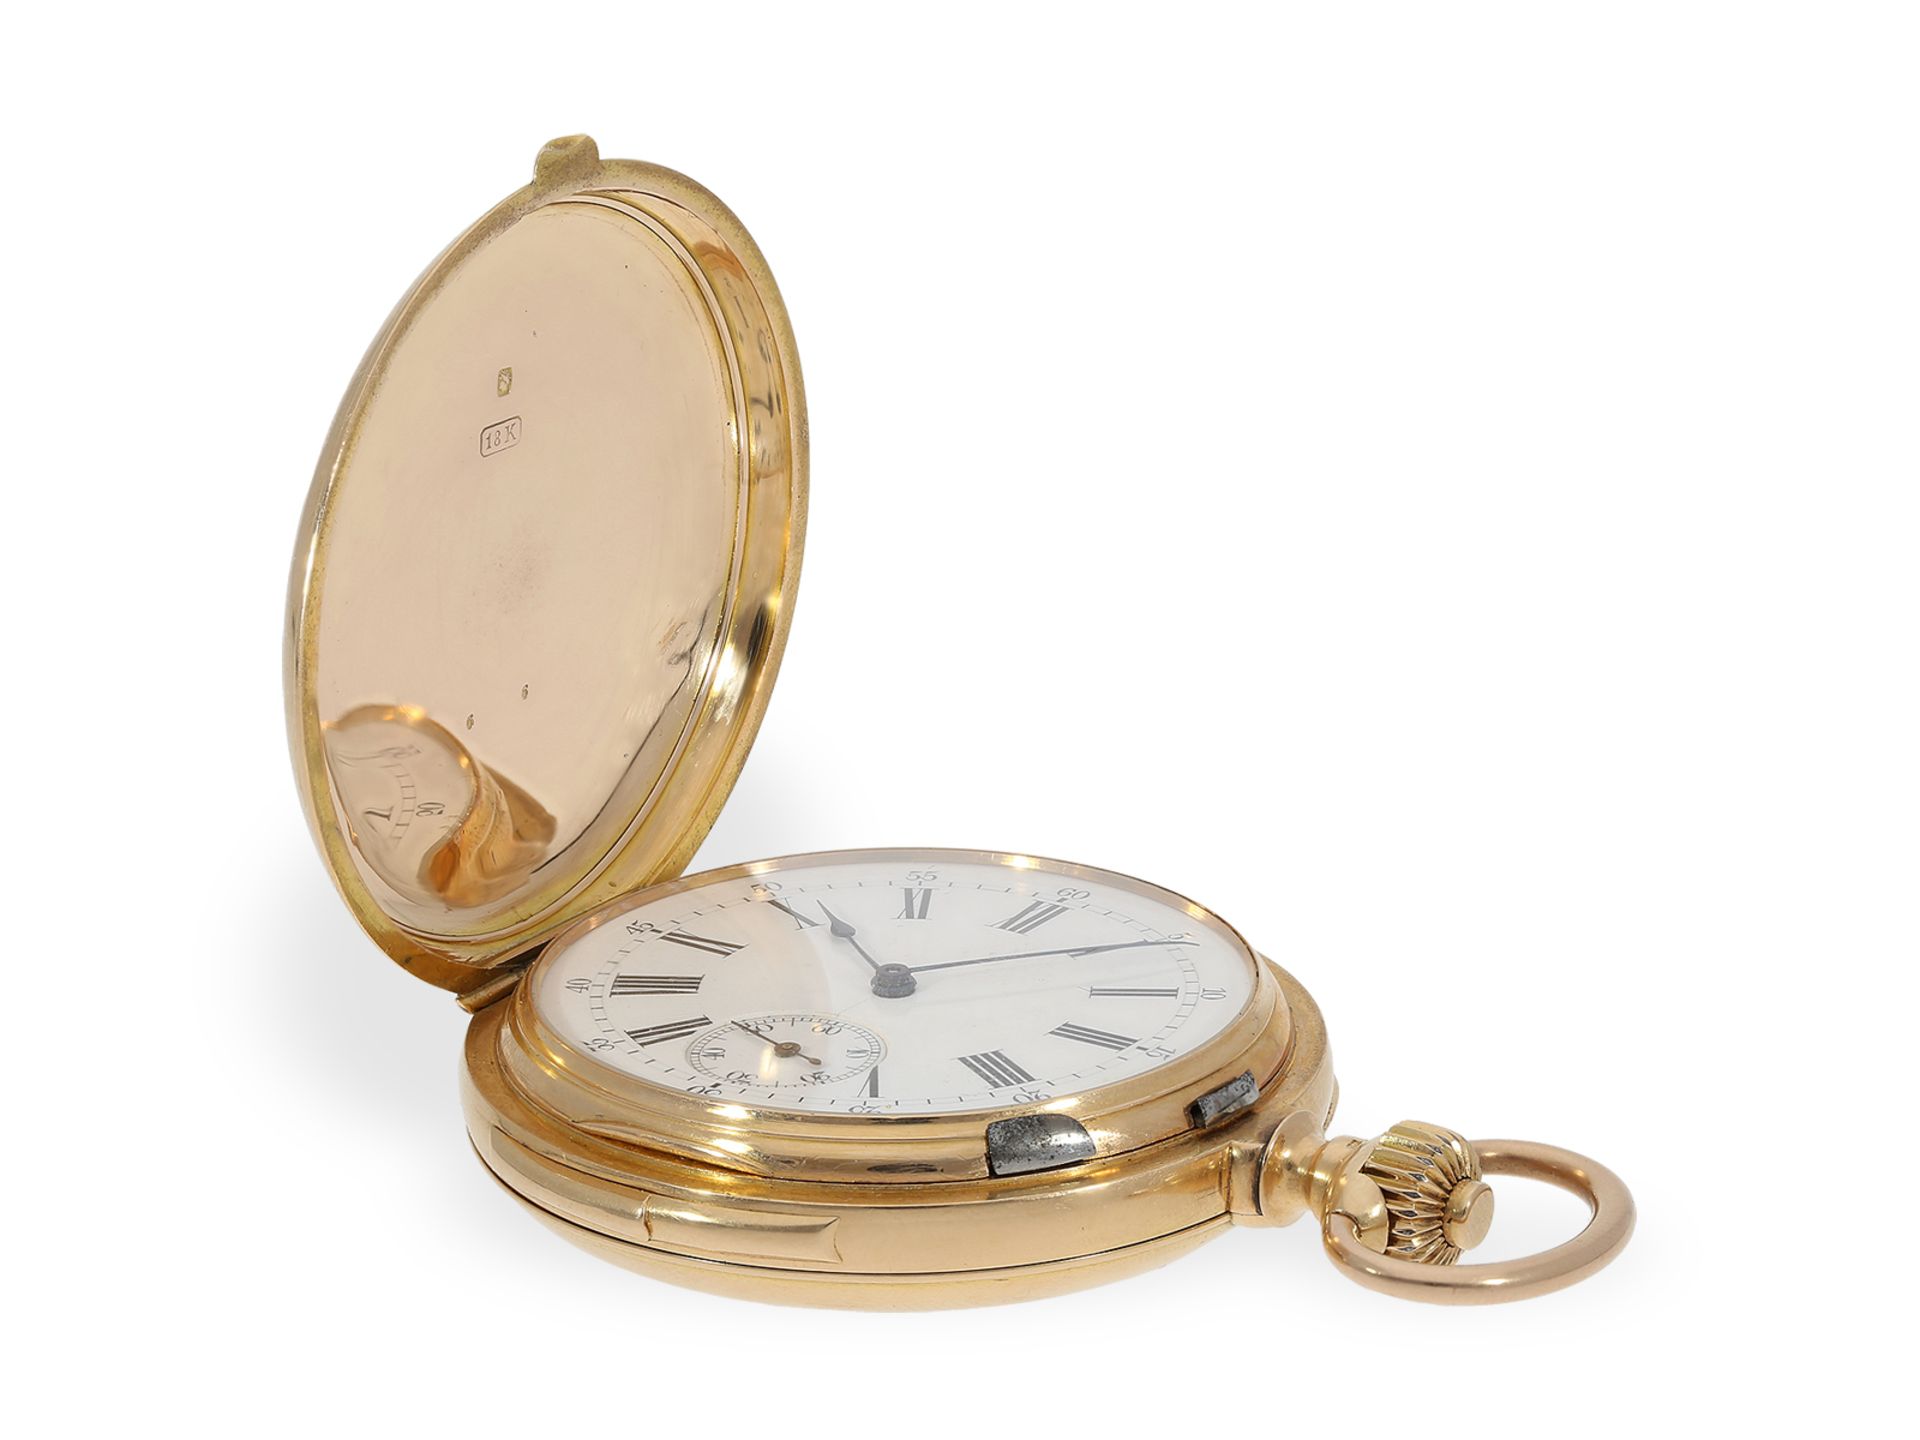 Pocket watch: very fine gold hunting case watch with repeater, probably Audemars Freres, ca. 1880 - Image 5 of 7